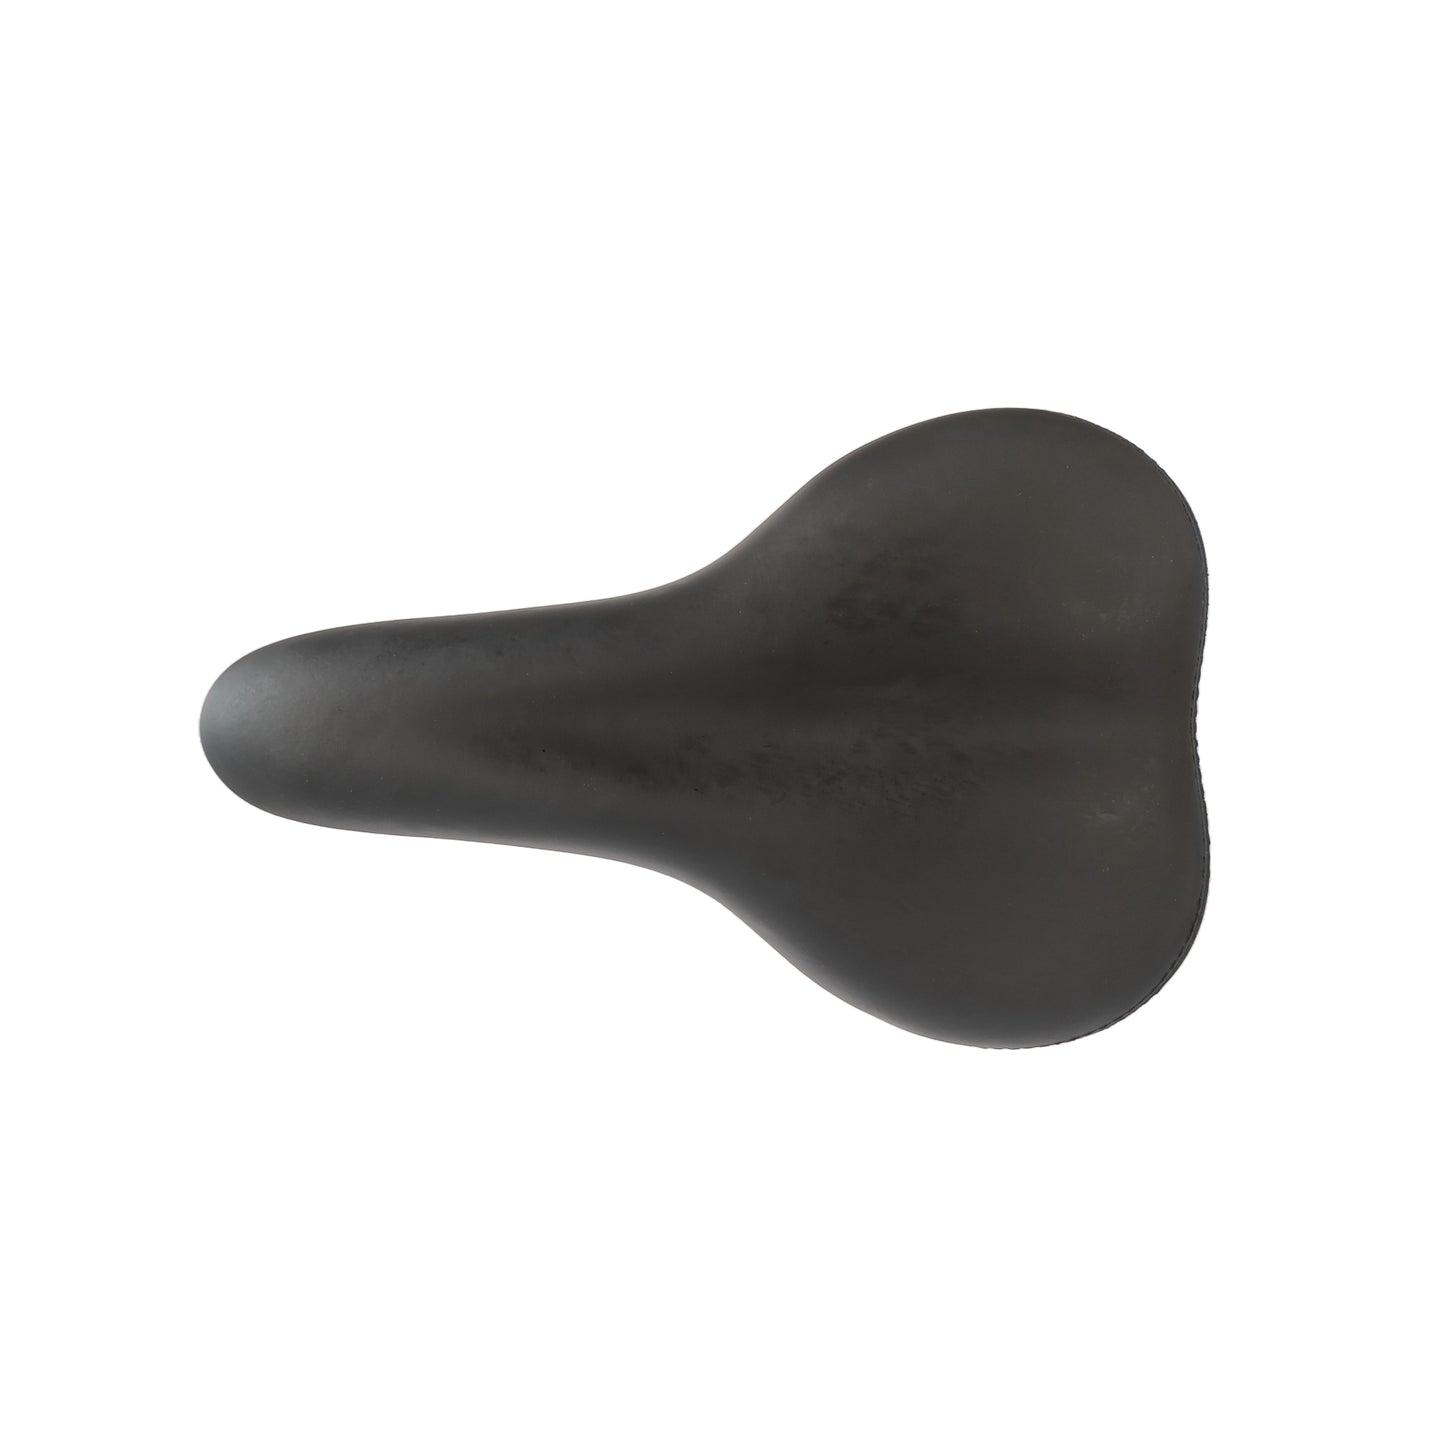 Bicycle saddle seat spare part top view by omobikes